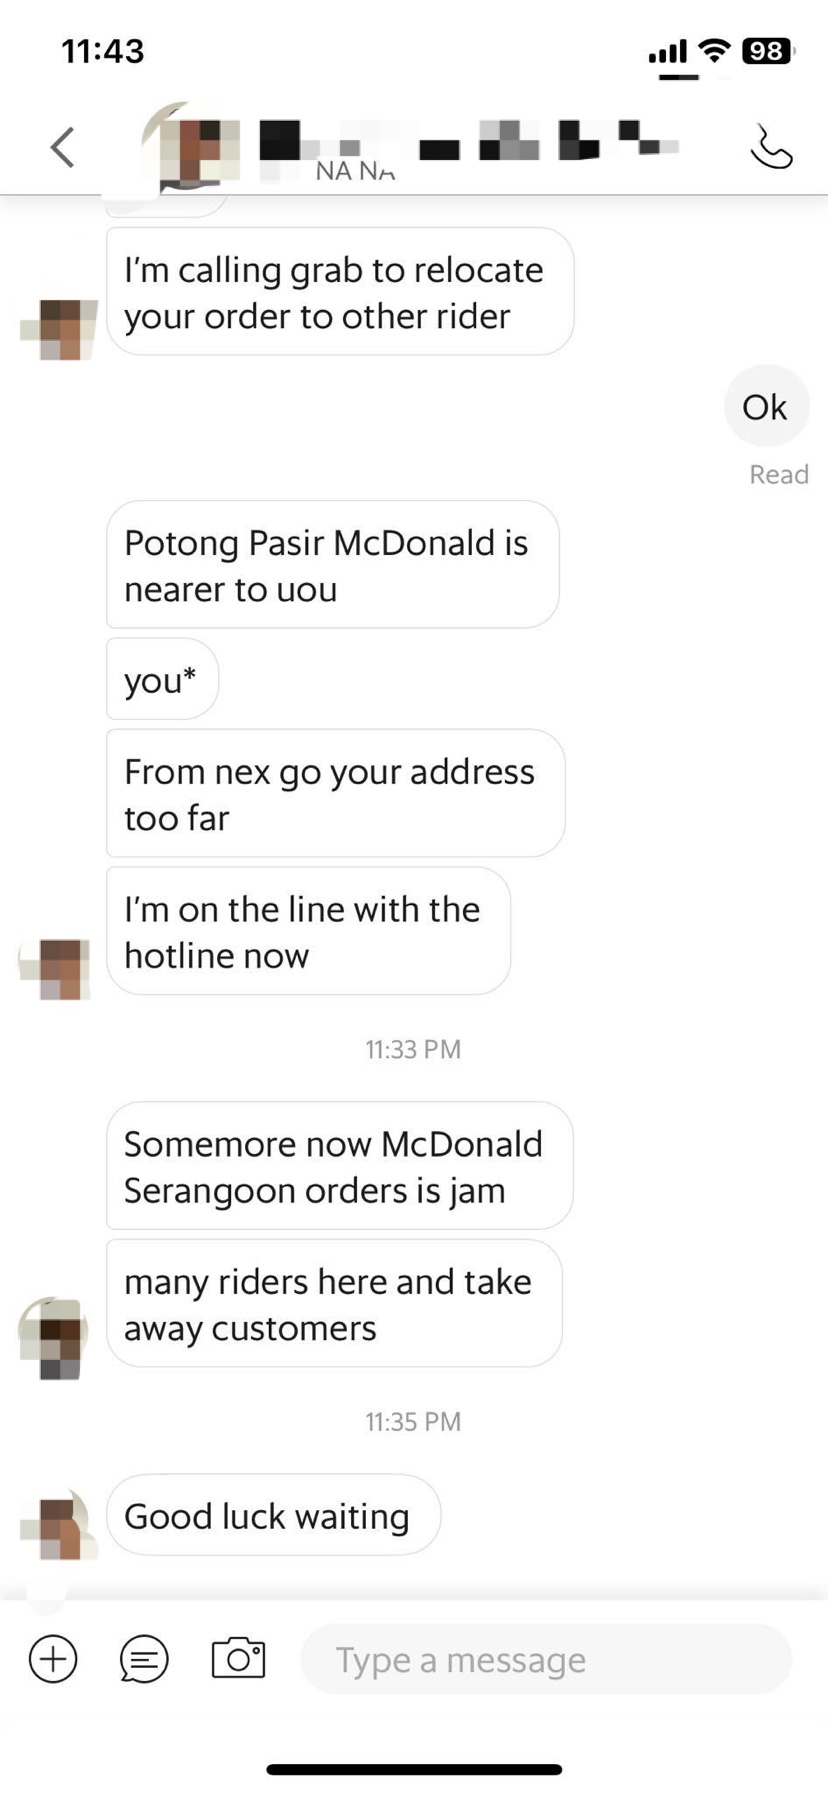 Sg grab delivery rider tosses customer's order as his house was too far, gets banned by company | weirdkaya